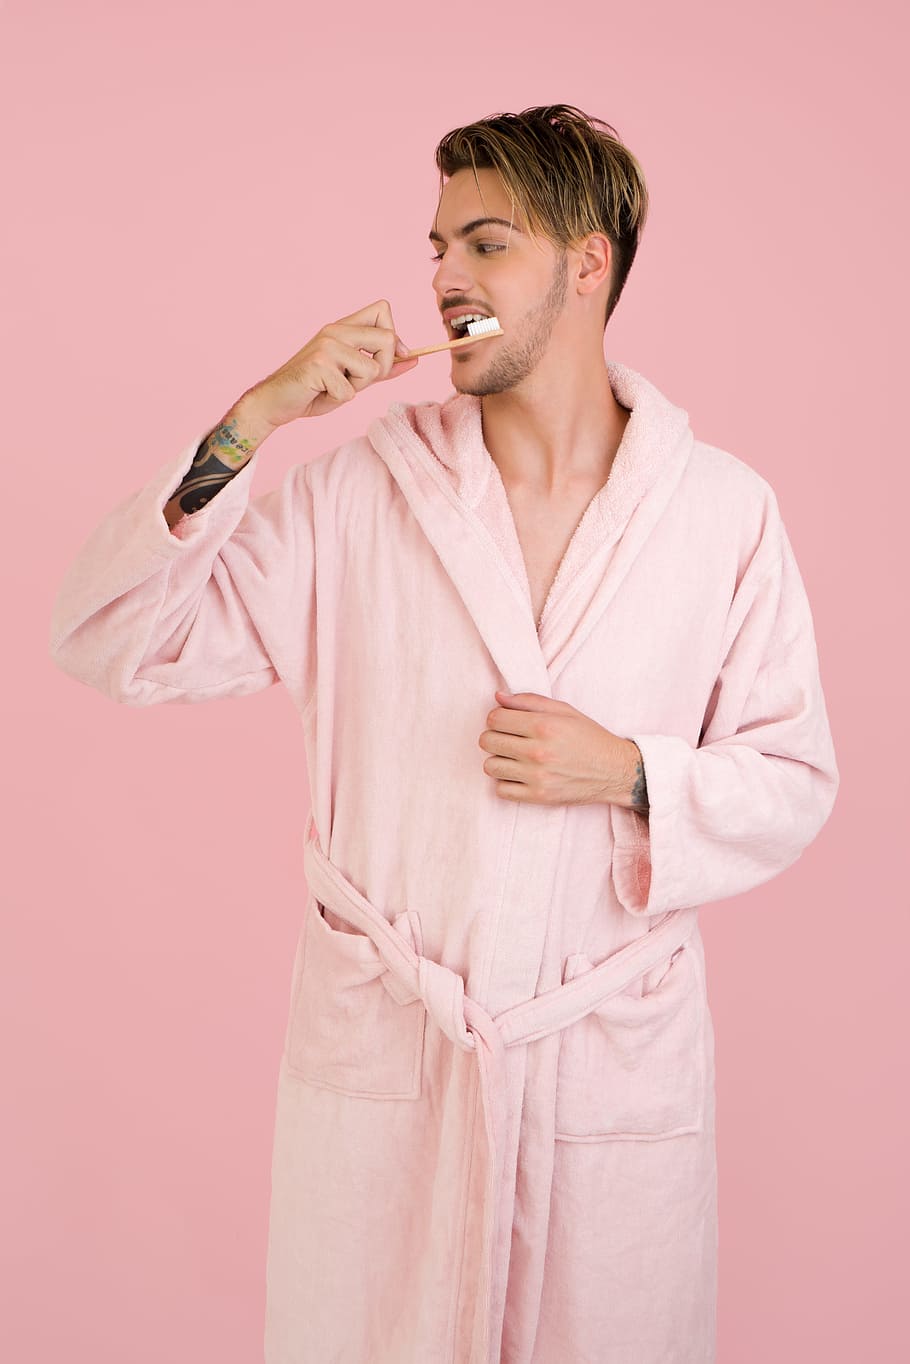 bathrobe, morning, brushing teeth, man, male, handsome man, pink, colored background, studio shot, one person